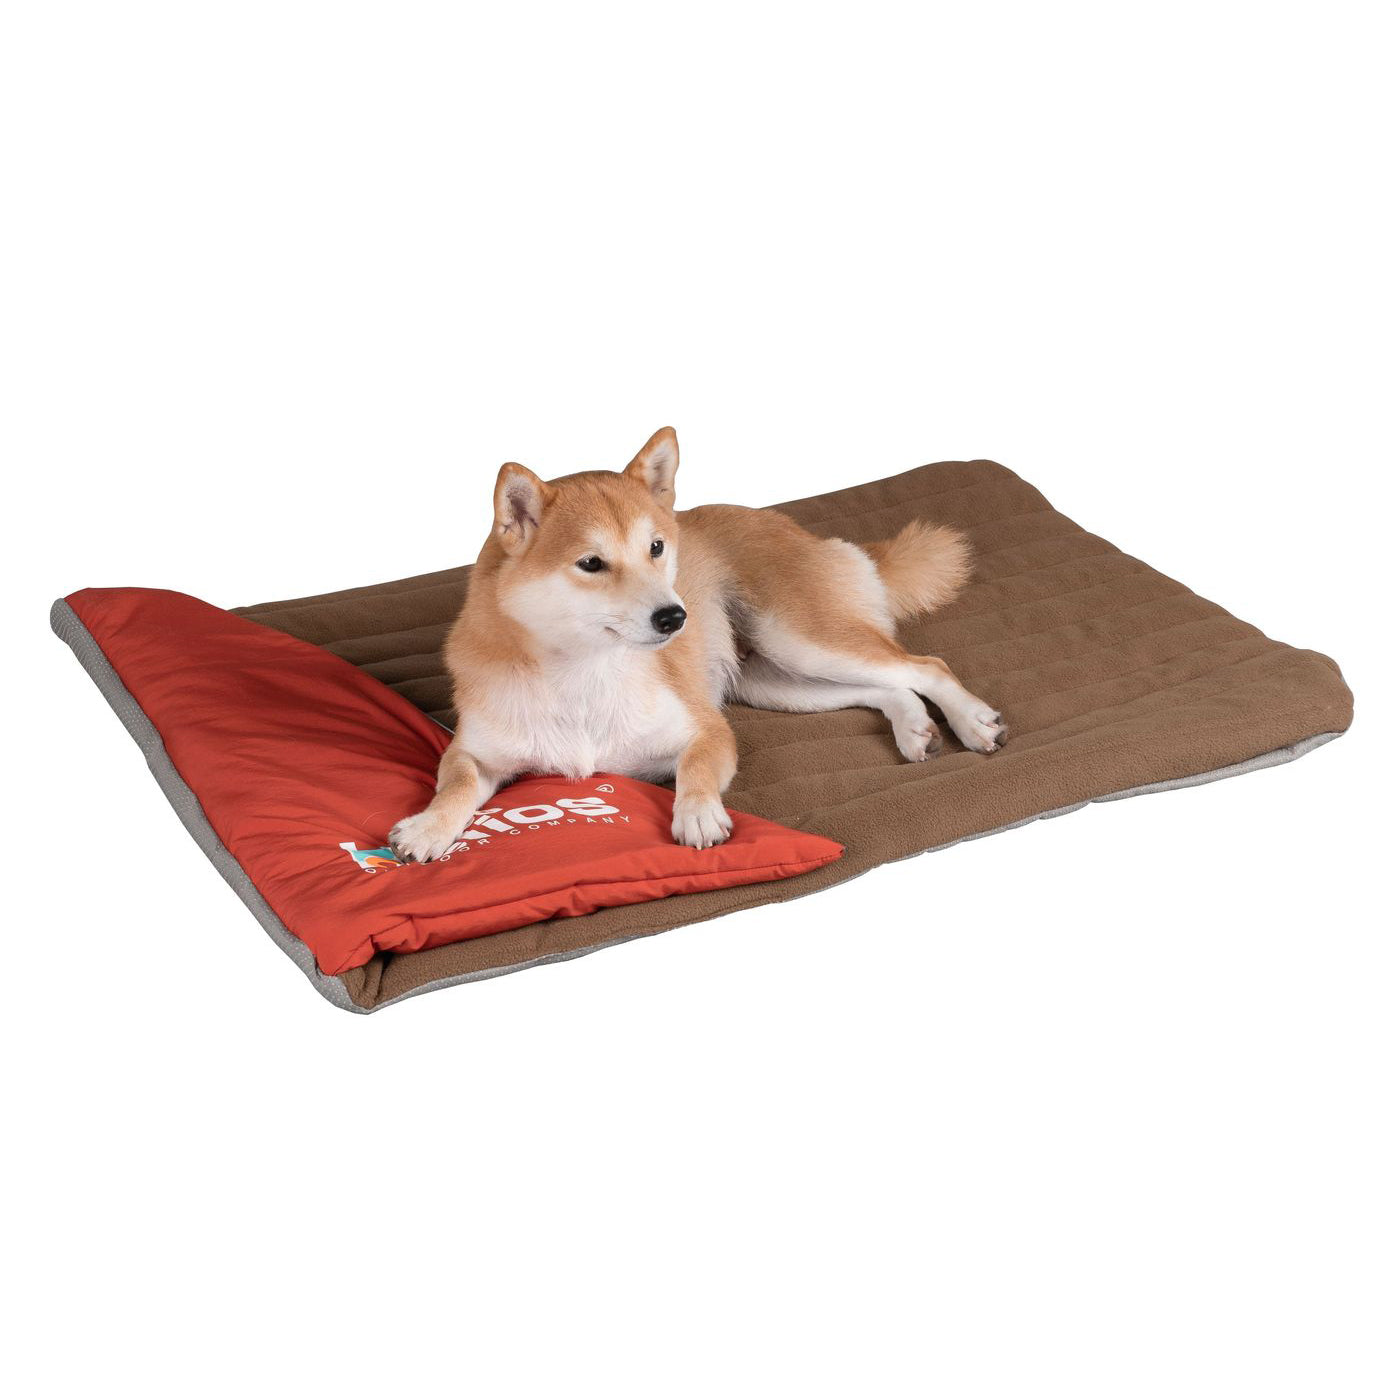 Expedition Sporty Travel Pillow Dog Bed